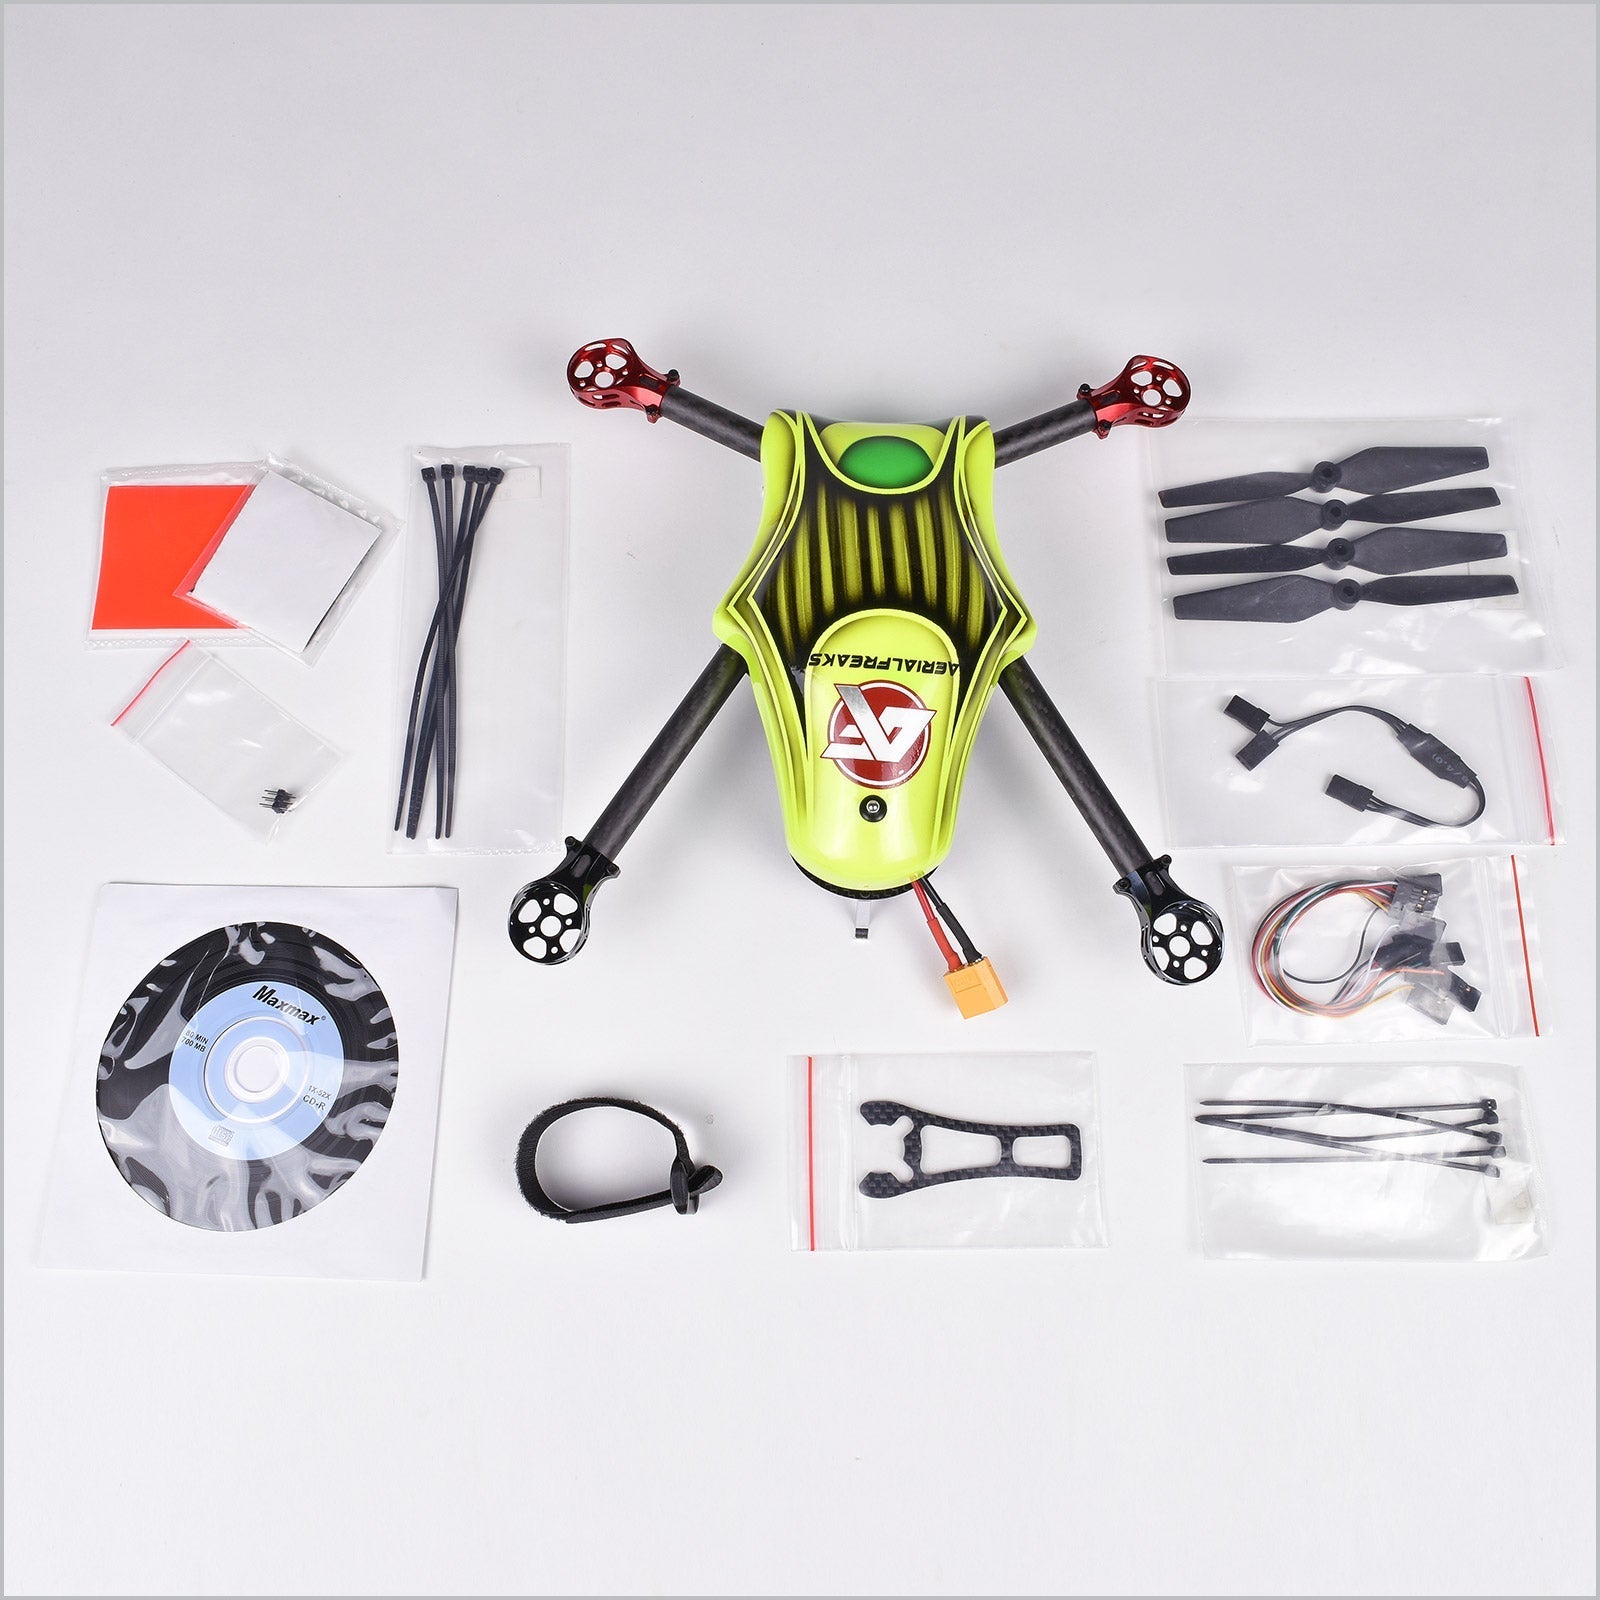 AerialFreaks Hyper 280 3D Quadcopter, Kit Only - Micro - Mark Remote Control Robots